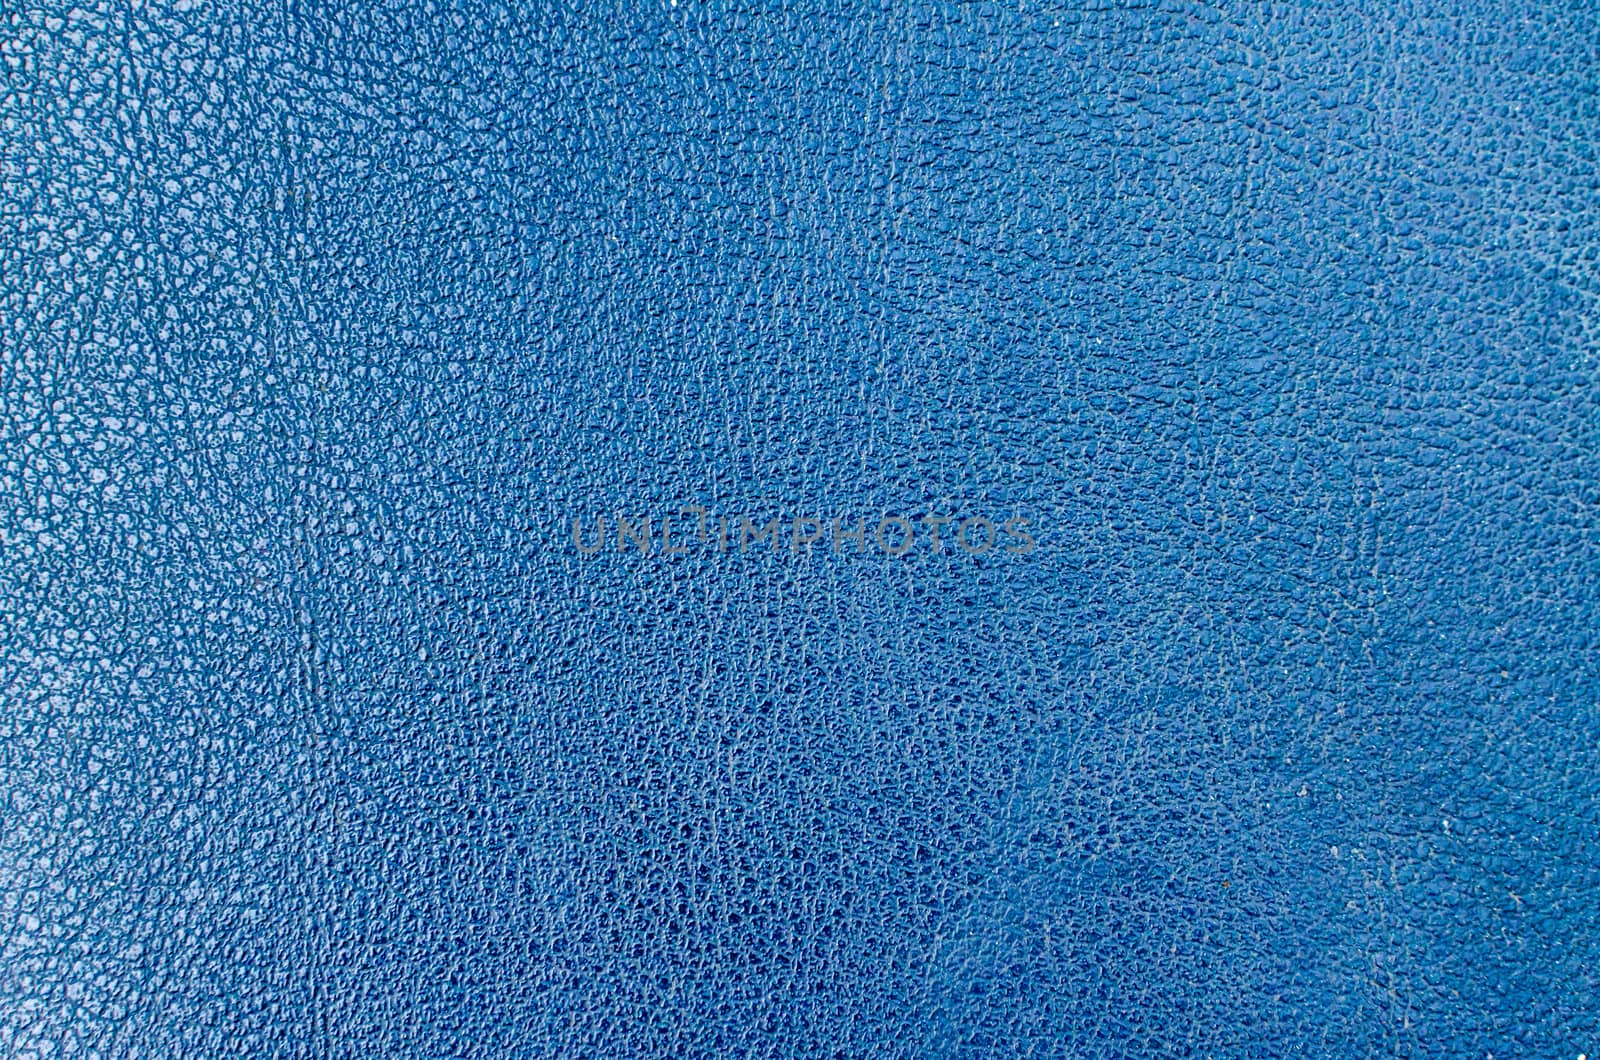 Blue leather background or texture by nopparats